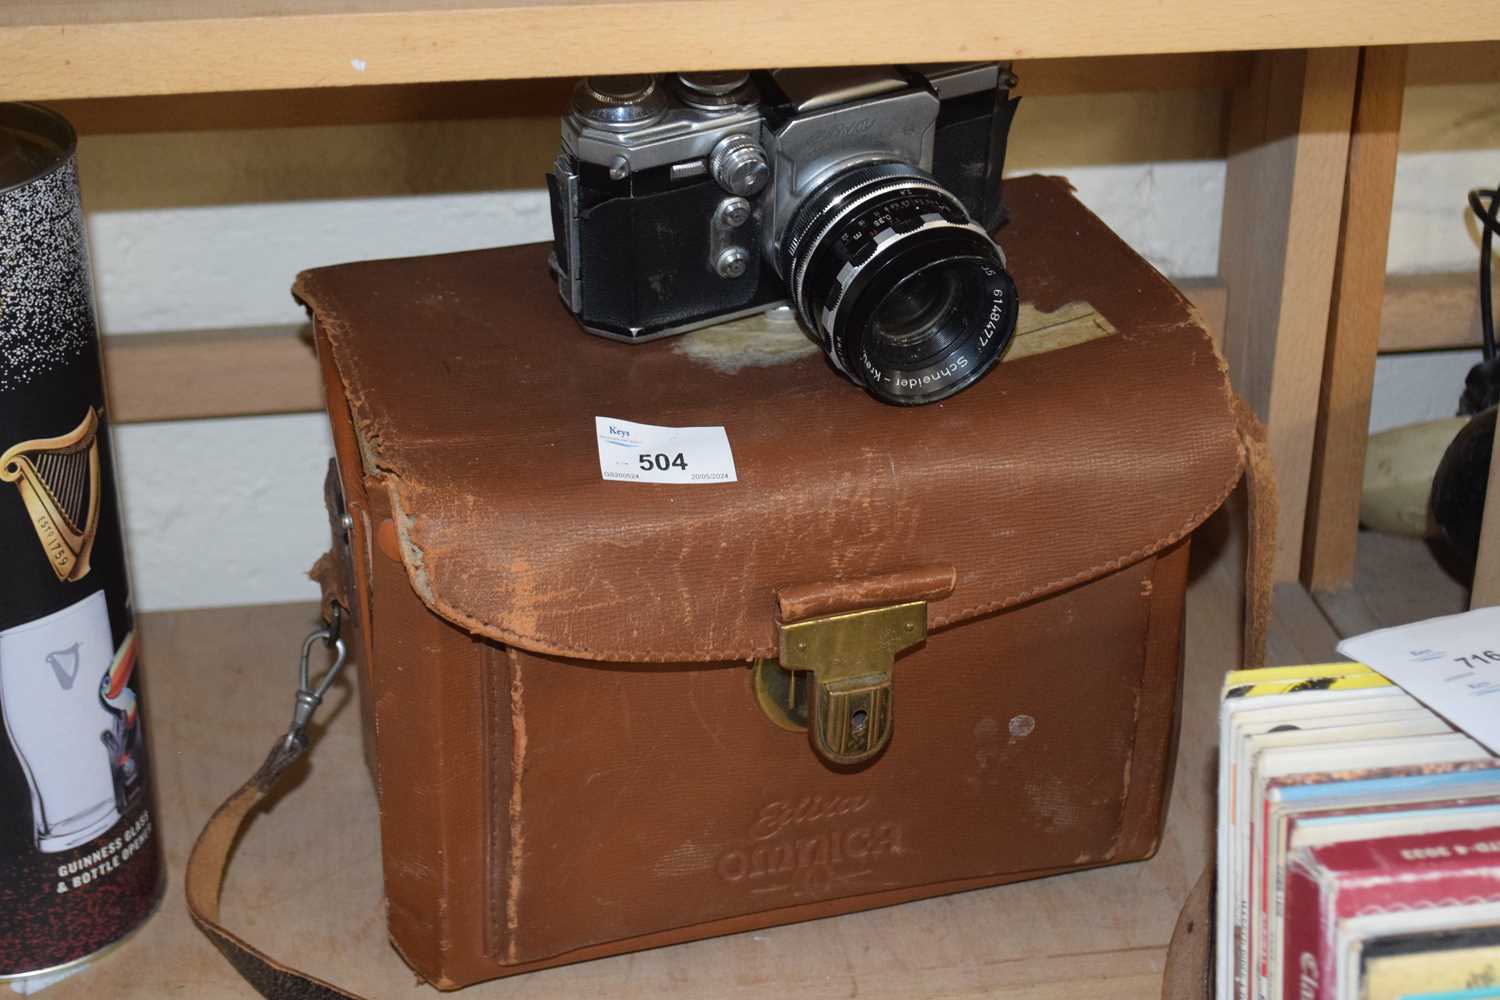 An Edixa Reflex-B camera with leather case and various accessories